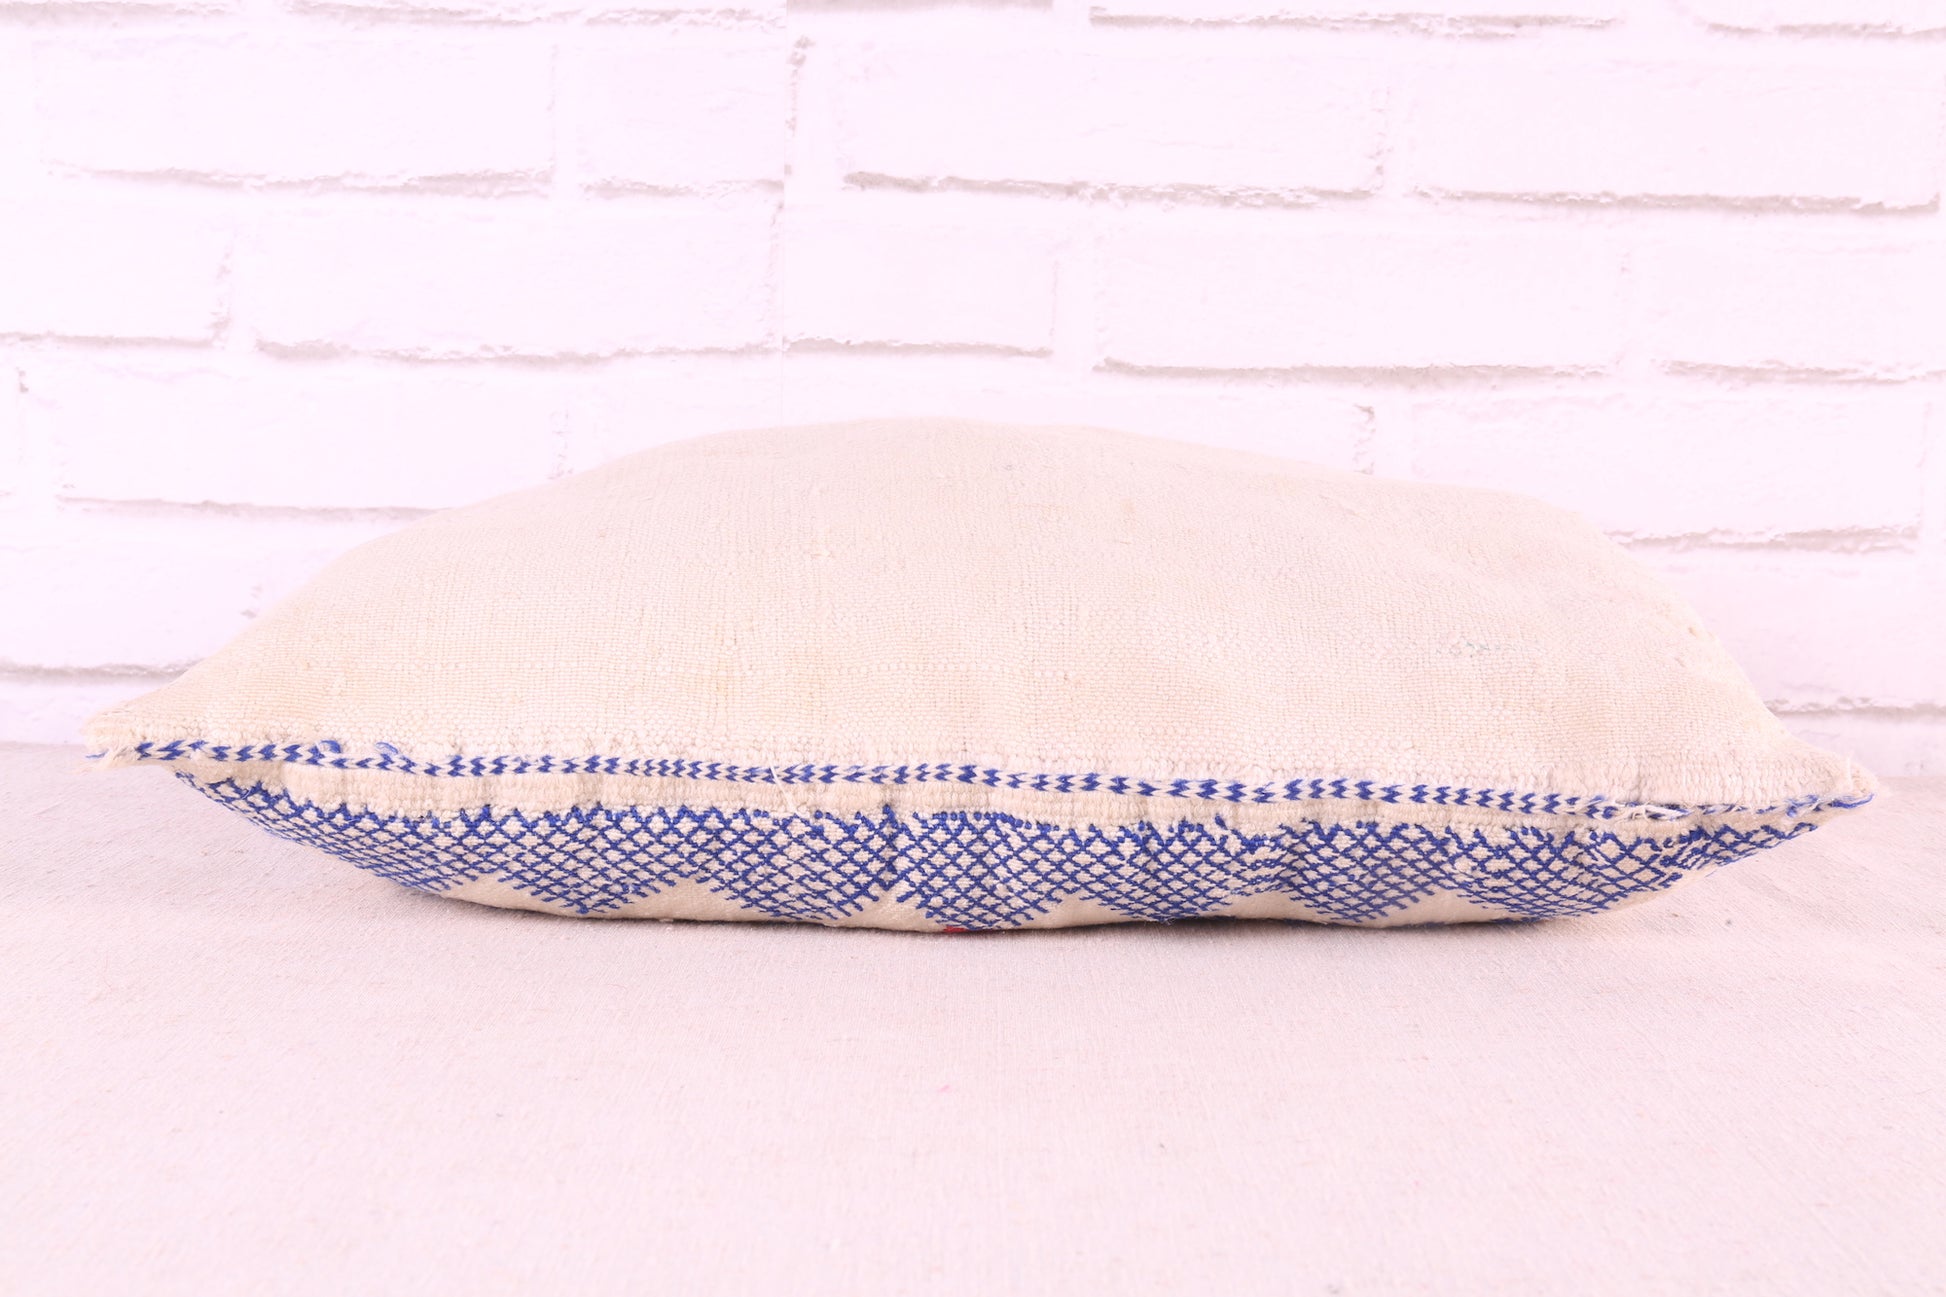 Moroccan pillow rug 14.9 inches X 18.8 inches